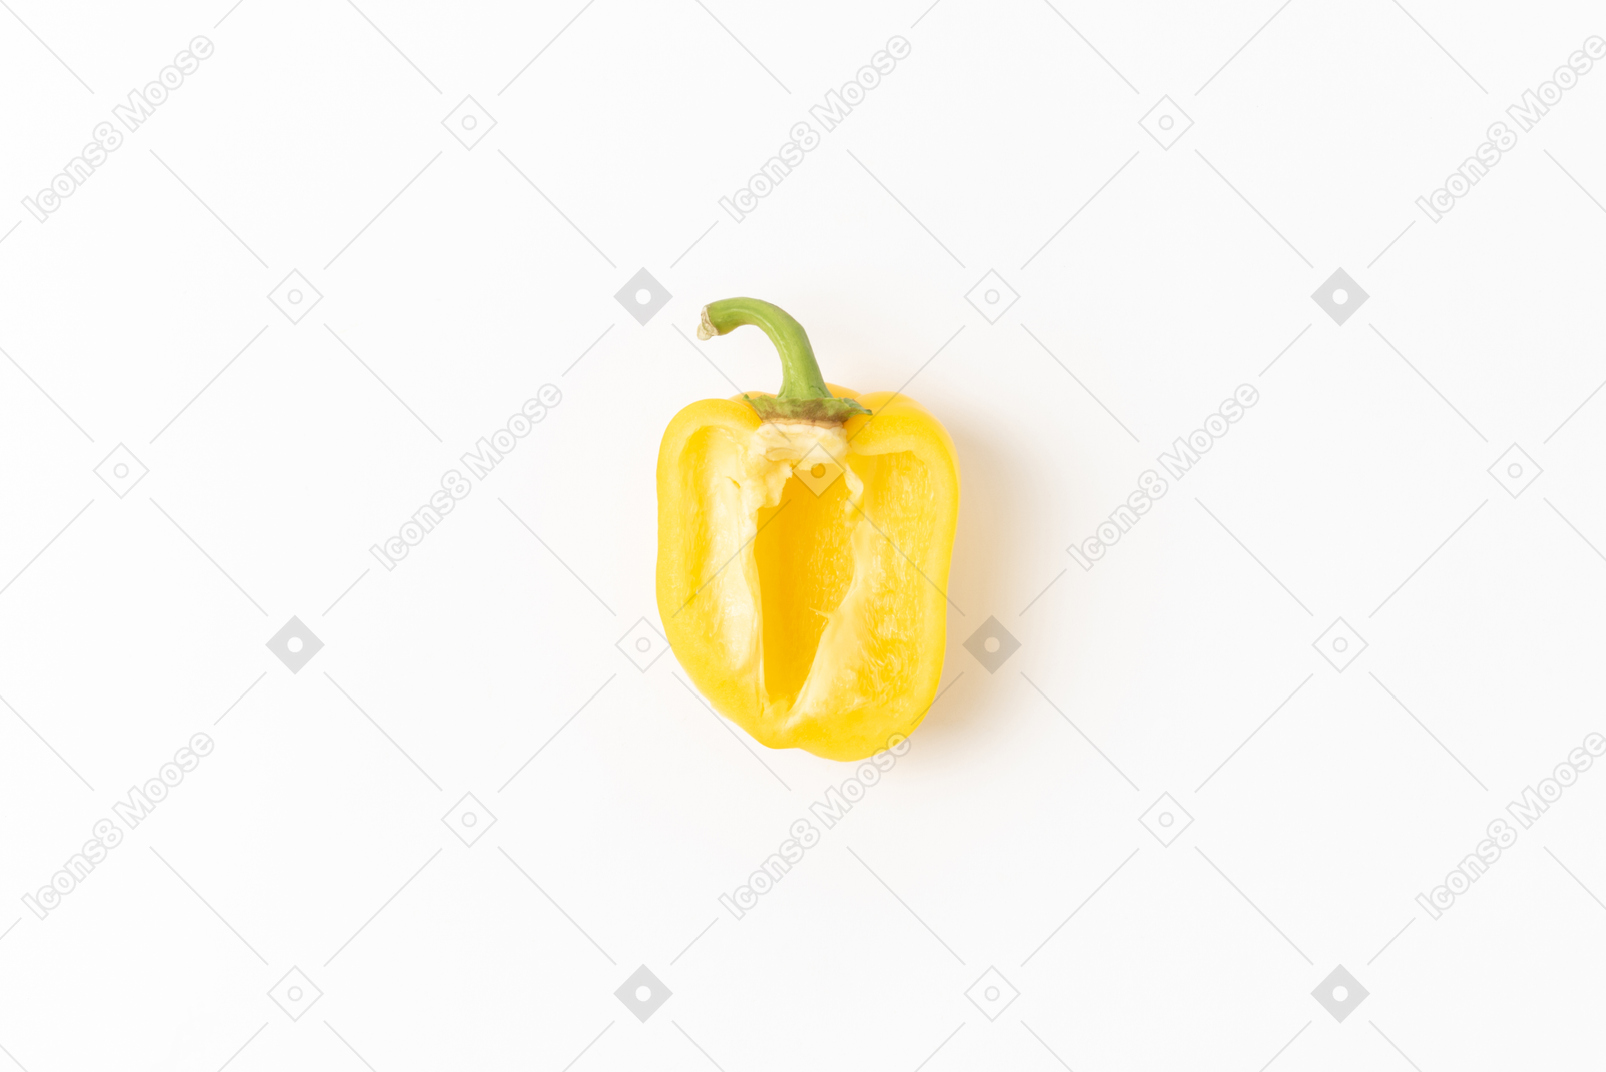 Bell pepper is good for healthy and also tastes good